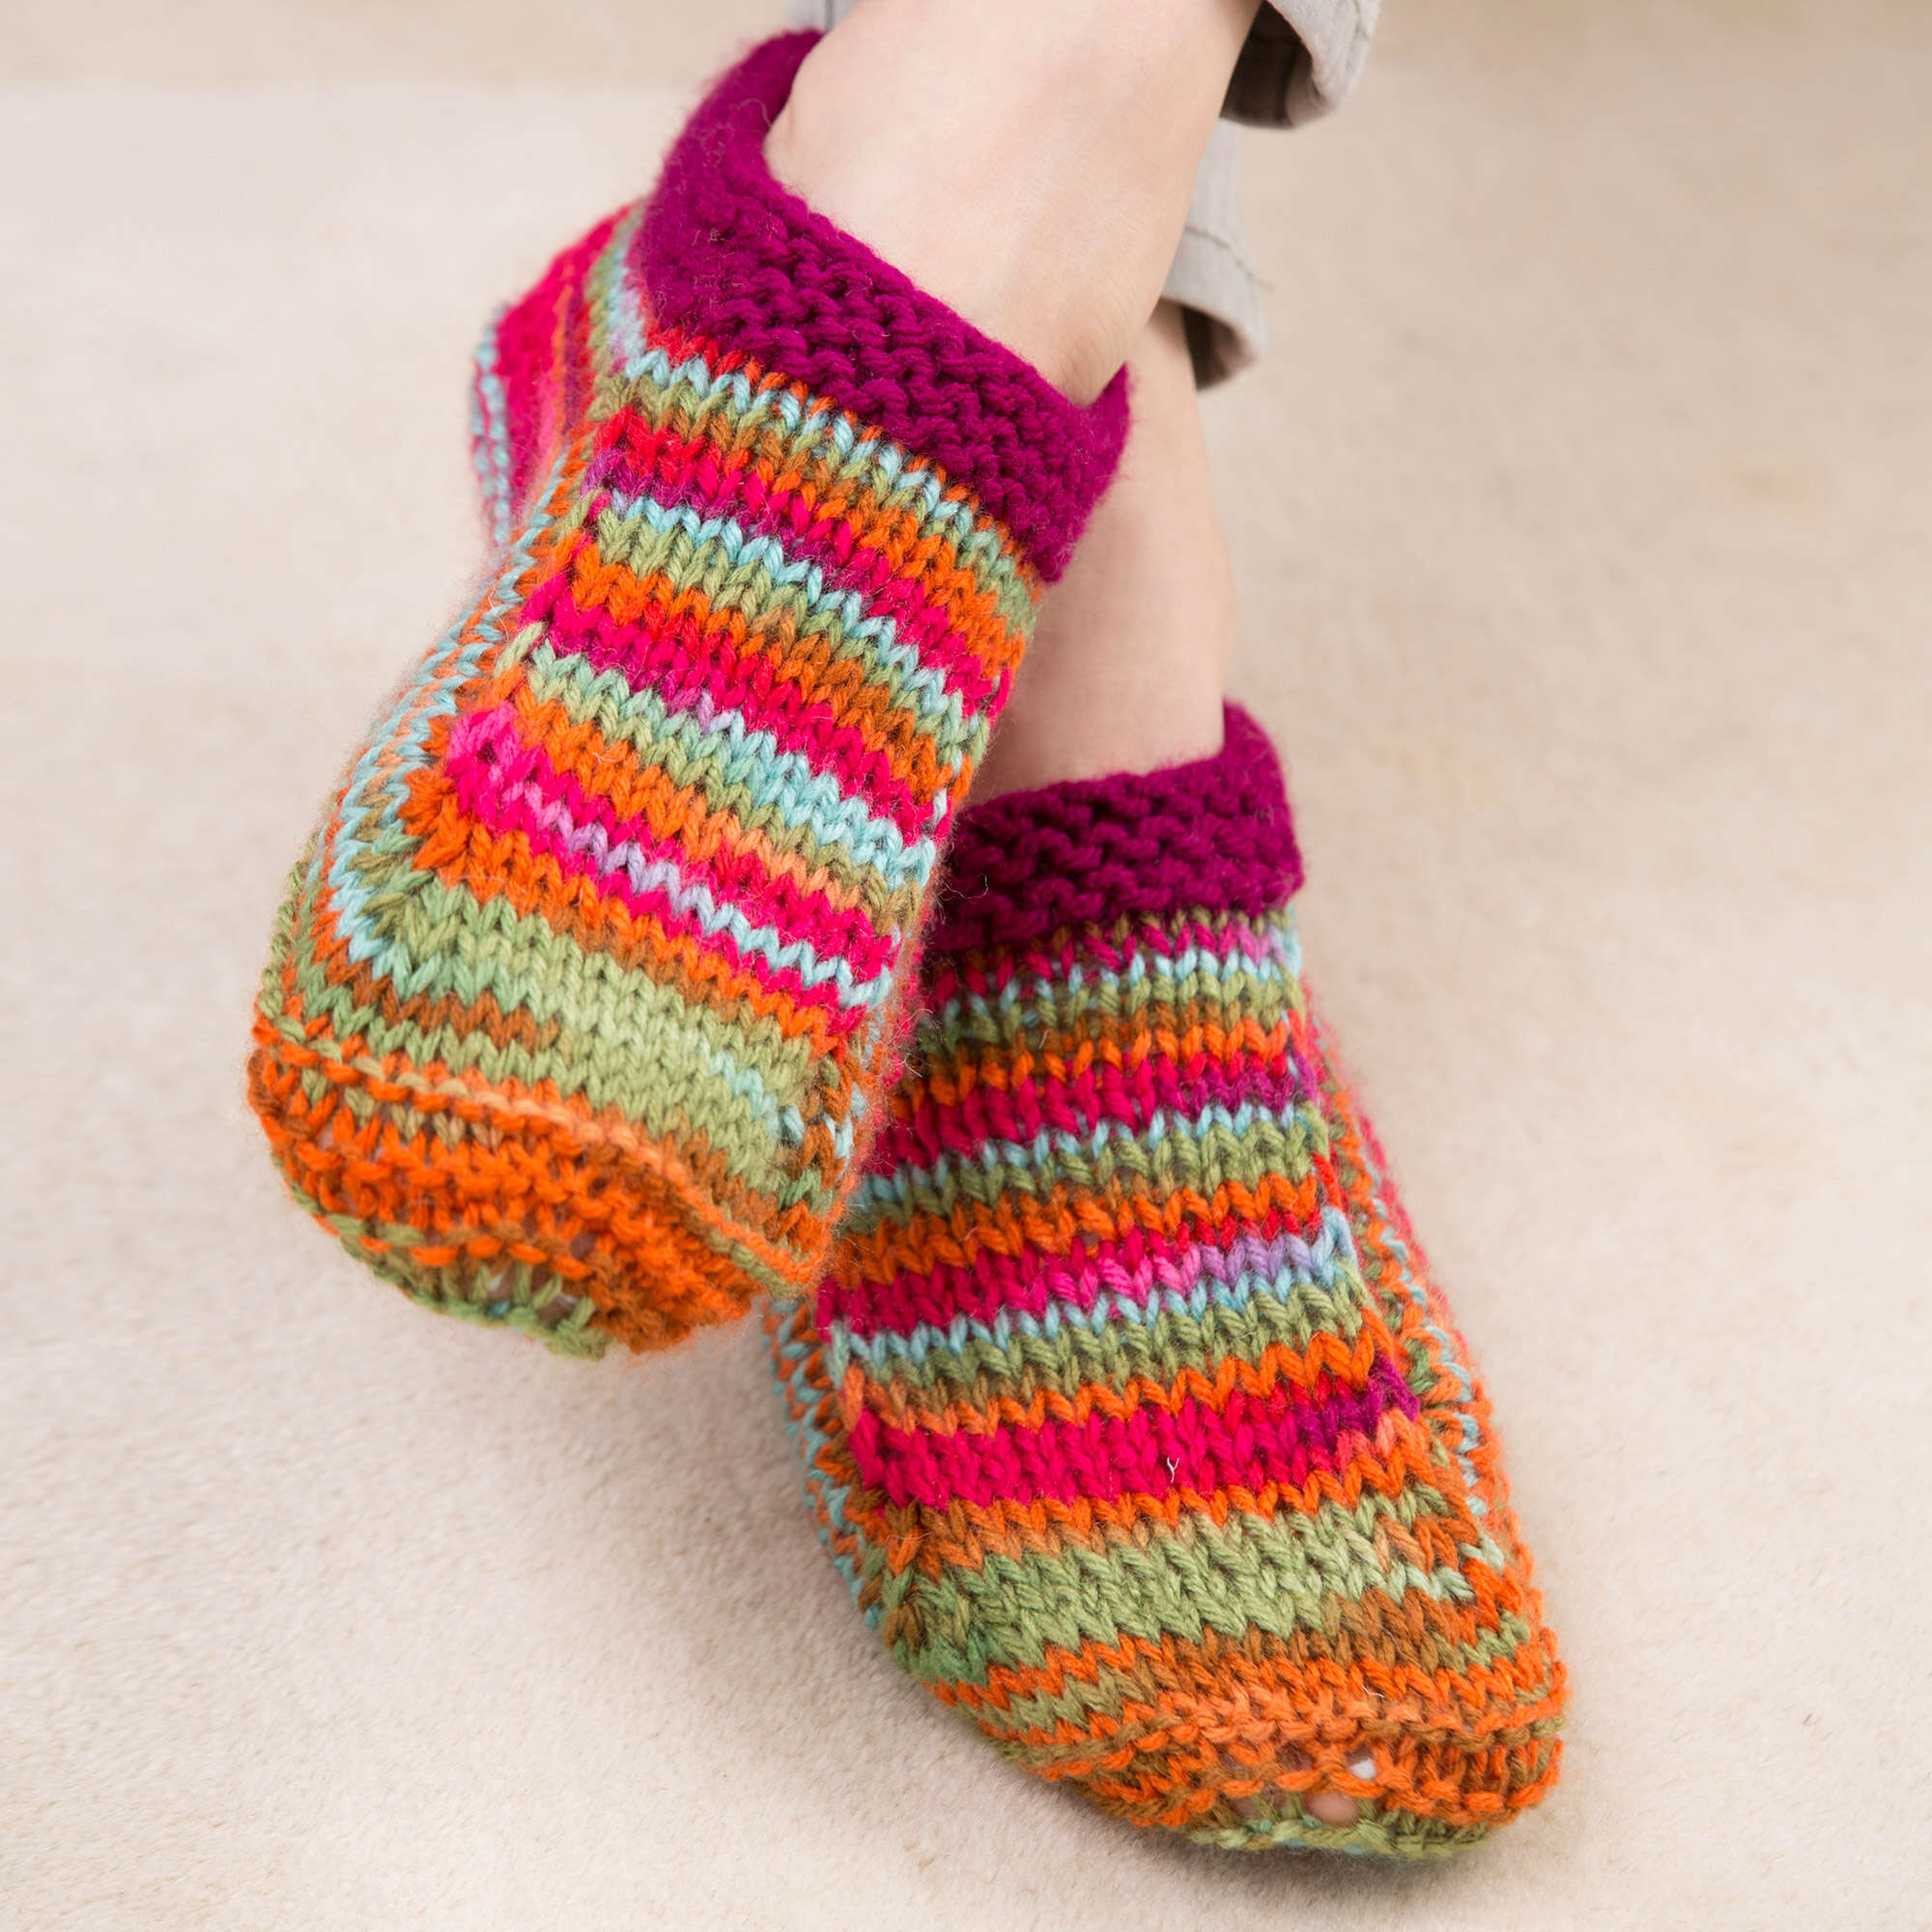 Easy Slippers knitting pattern (using Garter stitch and straight needles) -  So Woolly - YouTube